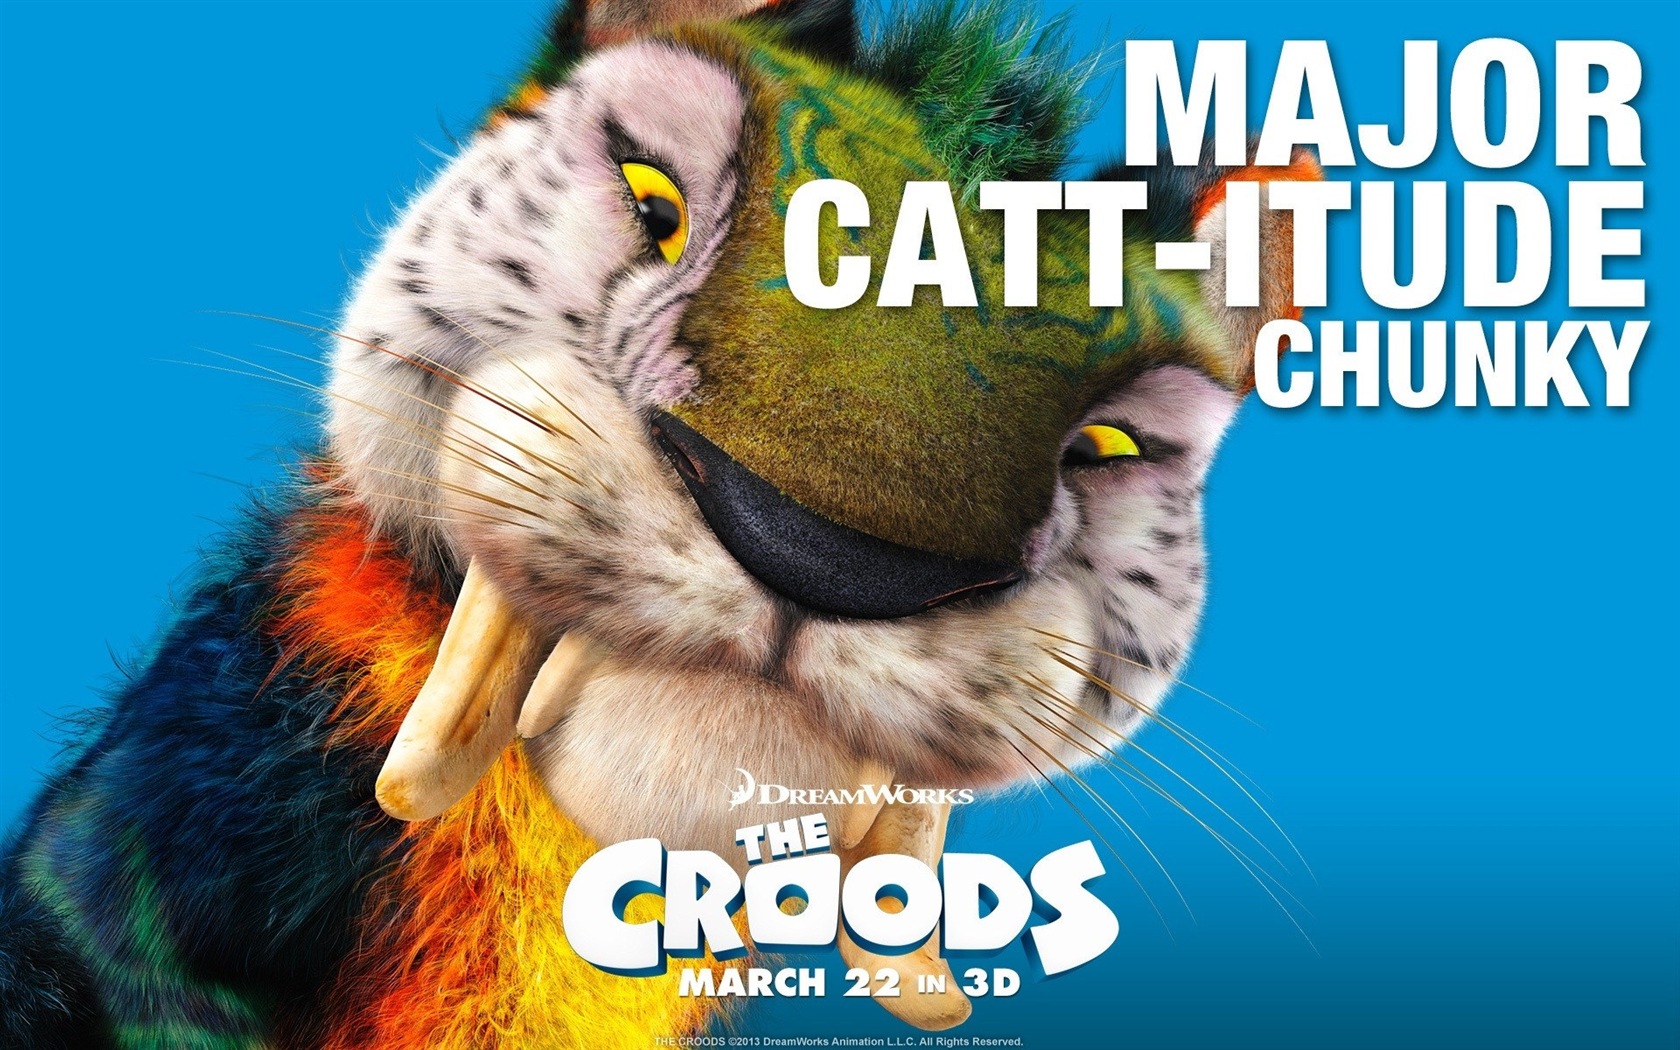 The Croods HD movie wallpapers #12 - 1680x1050